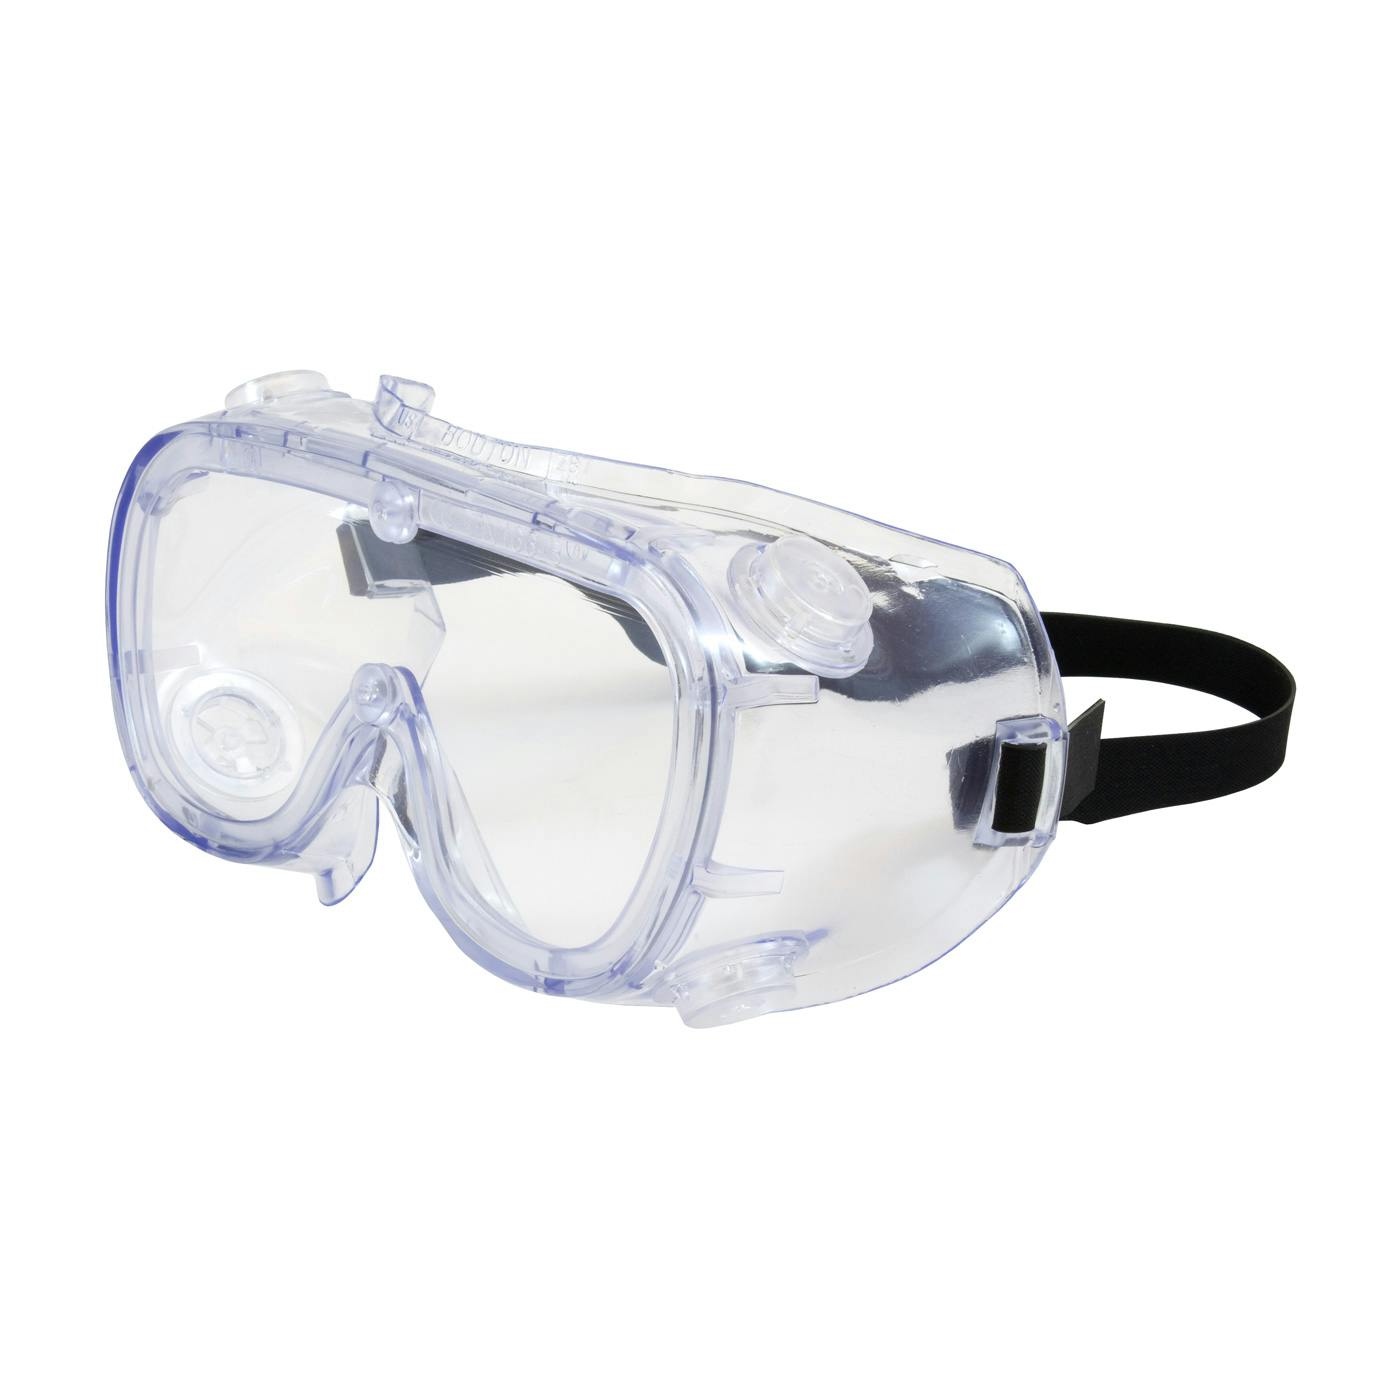 Indirect Vent Goggle with Clear Blue Body, Clear Lens and Anti-Scratch Coating, Clear (248-5190-300B) - OS